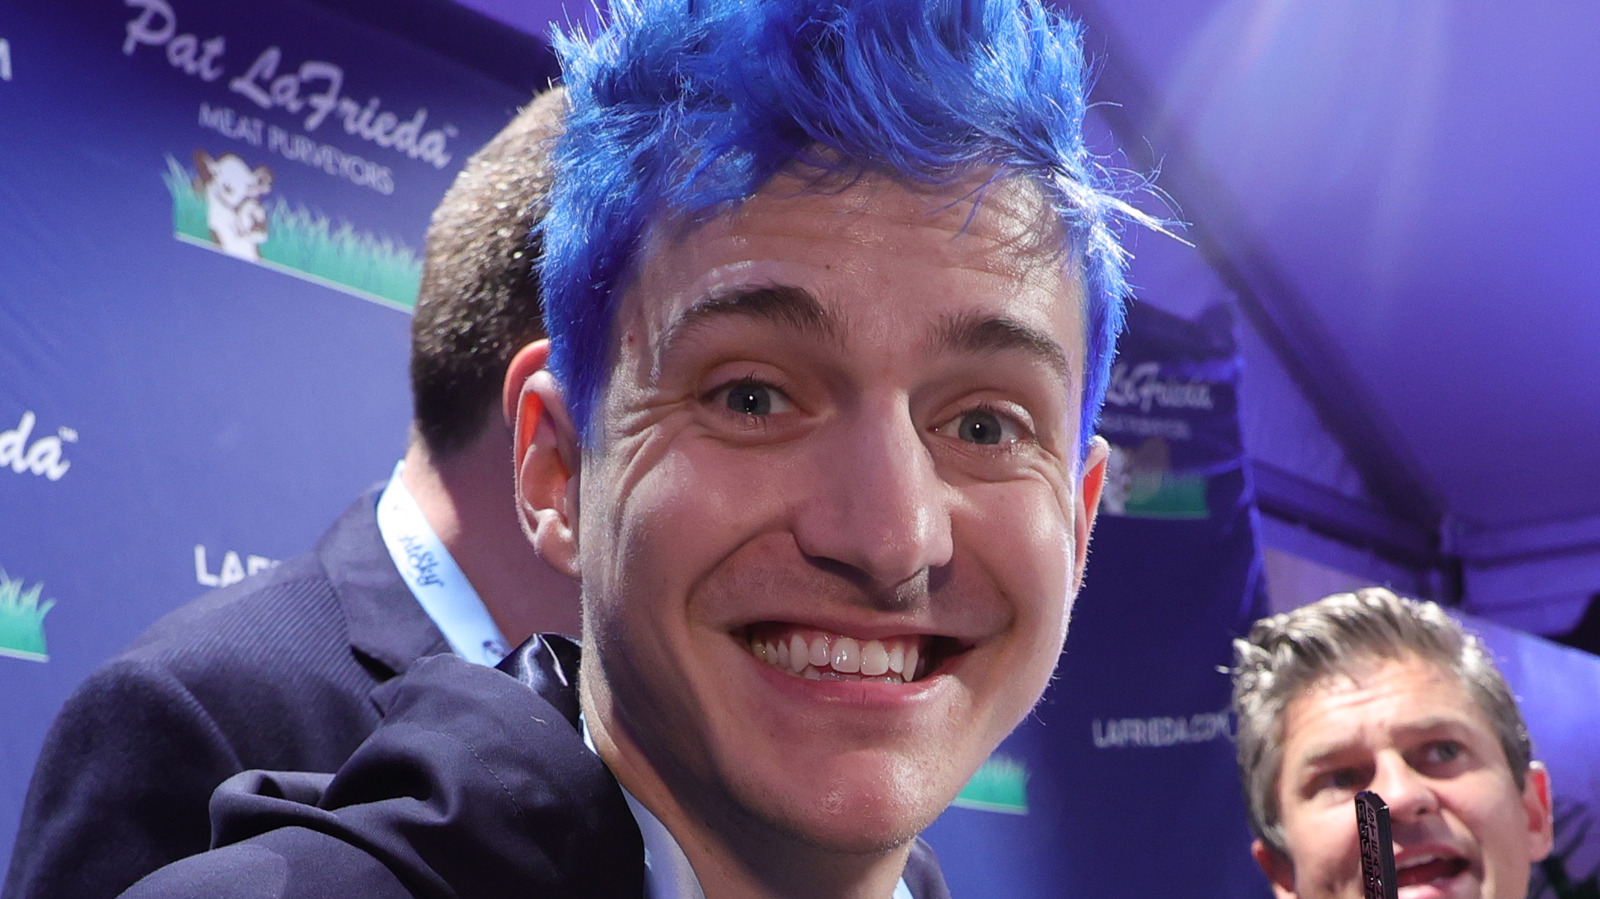 Ninja's Mixer Deal Was Even More Tragic Than You Realized